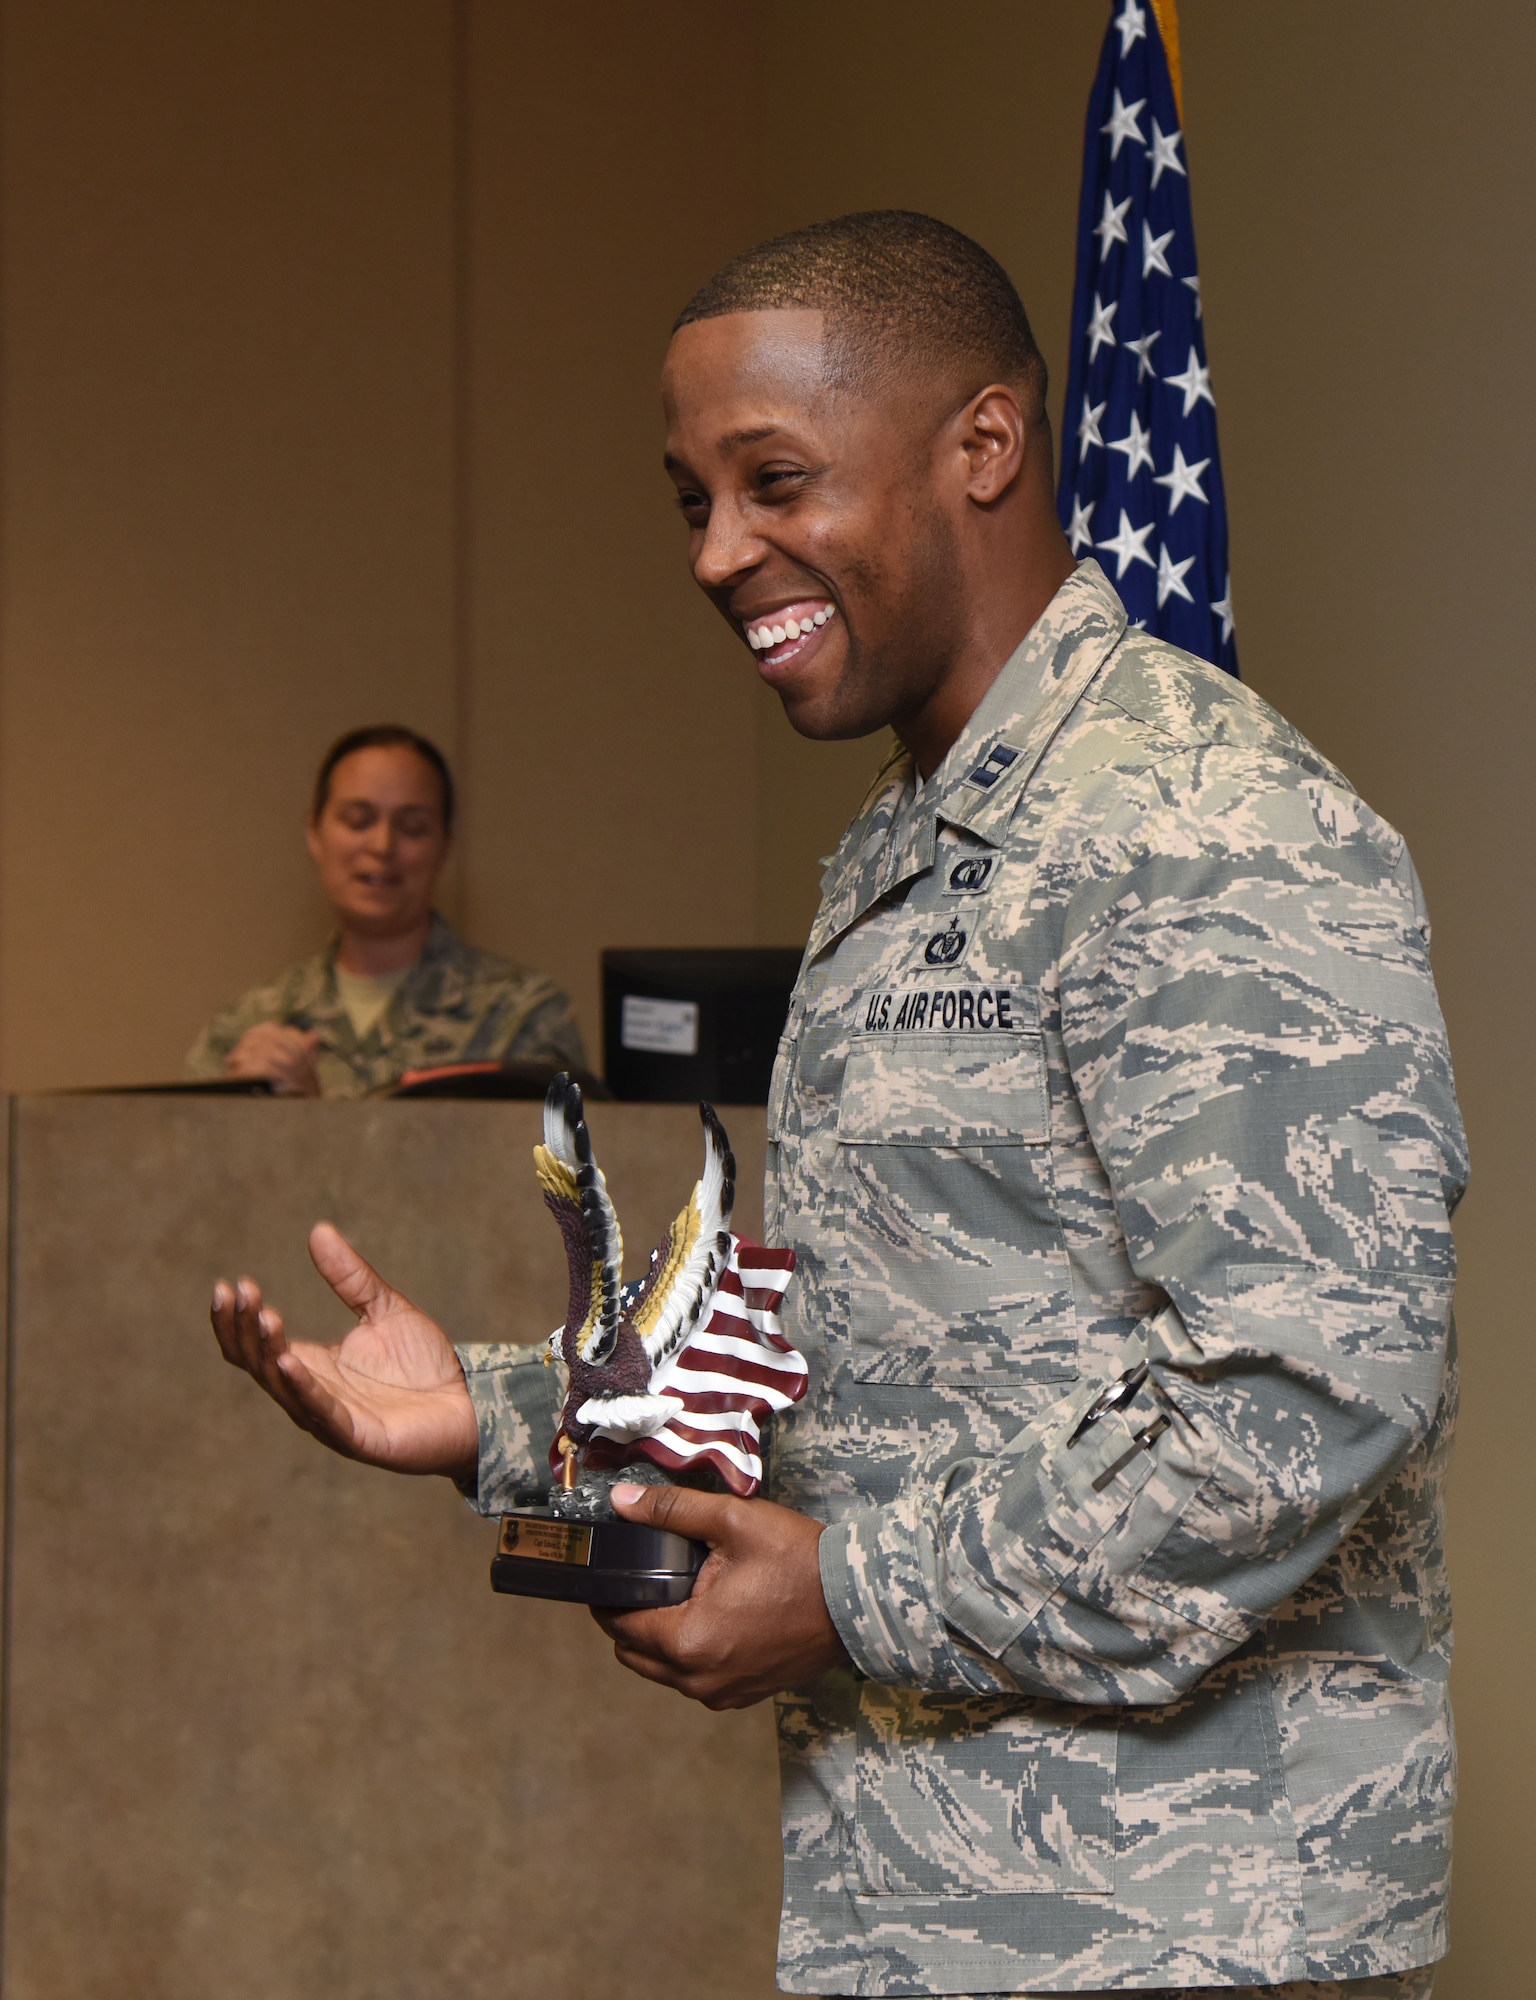 Capt. Edwin Pratt, 81st Training Wing executive officer, delivers comments after being presented with the Byron “BT” Parcenue Airfield Operations Professional of the Year award during an awards presentation at Cody Hall June 8, 2017, on Keesler Air Force Base, Miss. Retired Chief Master Sgt. Byron “BT” Parcenue presented the 2016 Air Education and Training Command Airfield Operations Annual Award named after him to Pratt. (U.S. Air Force photo by Kemberly Groue)